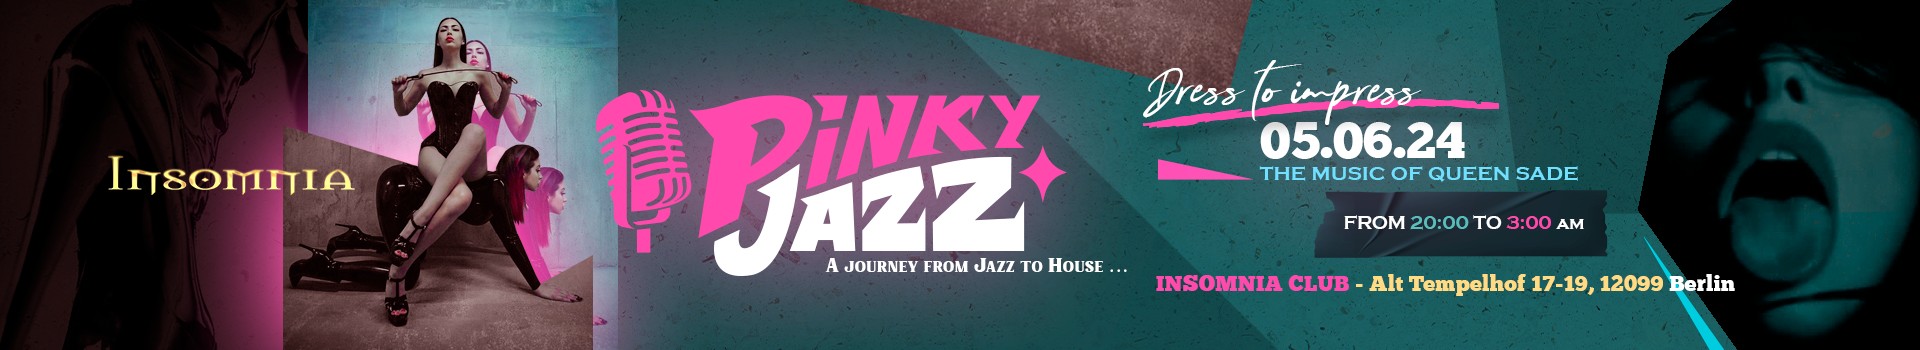 Pinky Jazz -  A Journey from Jazz to House